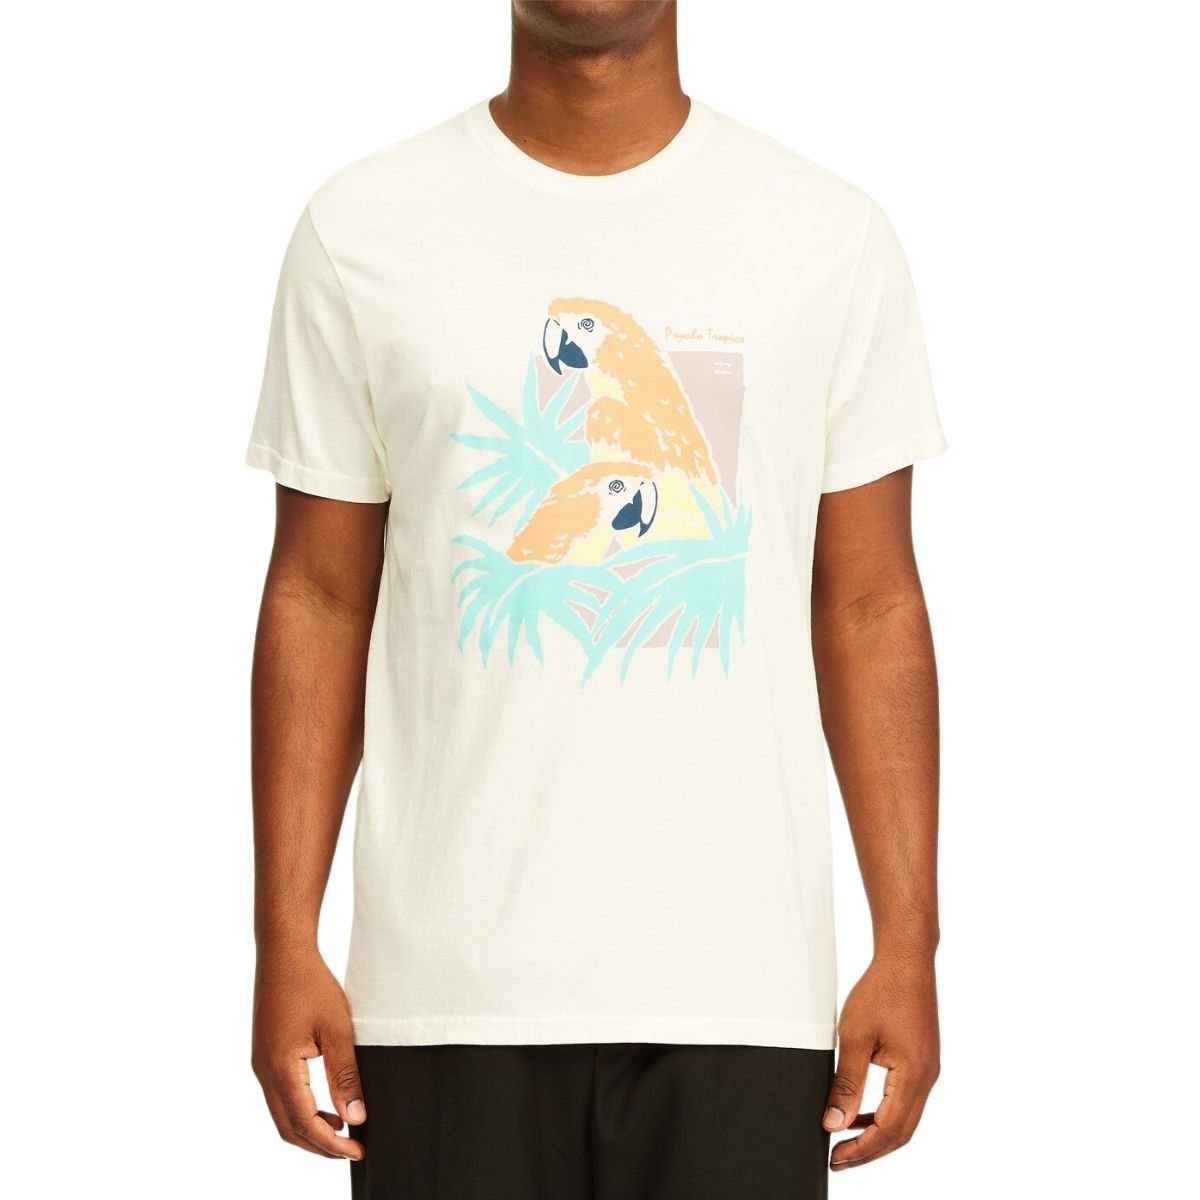 Billabong Scarlet SS Wave Washed Tee in Off White - BoardCo